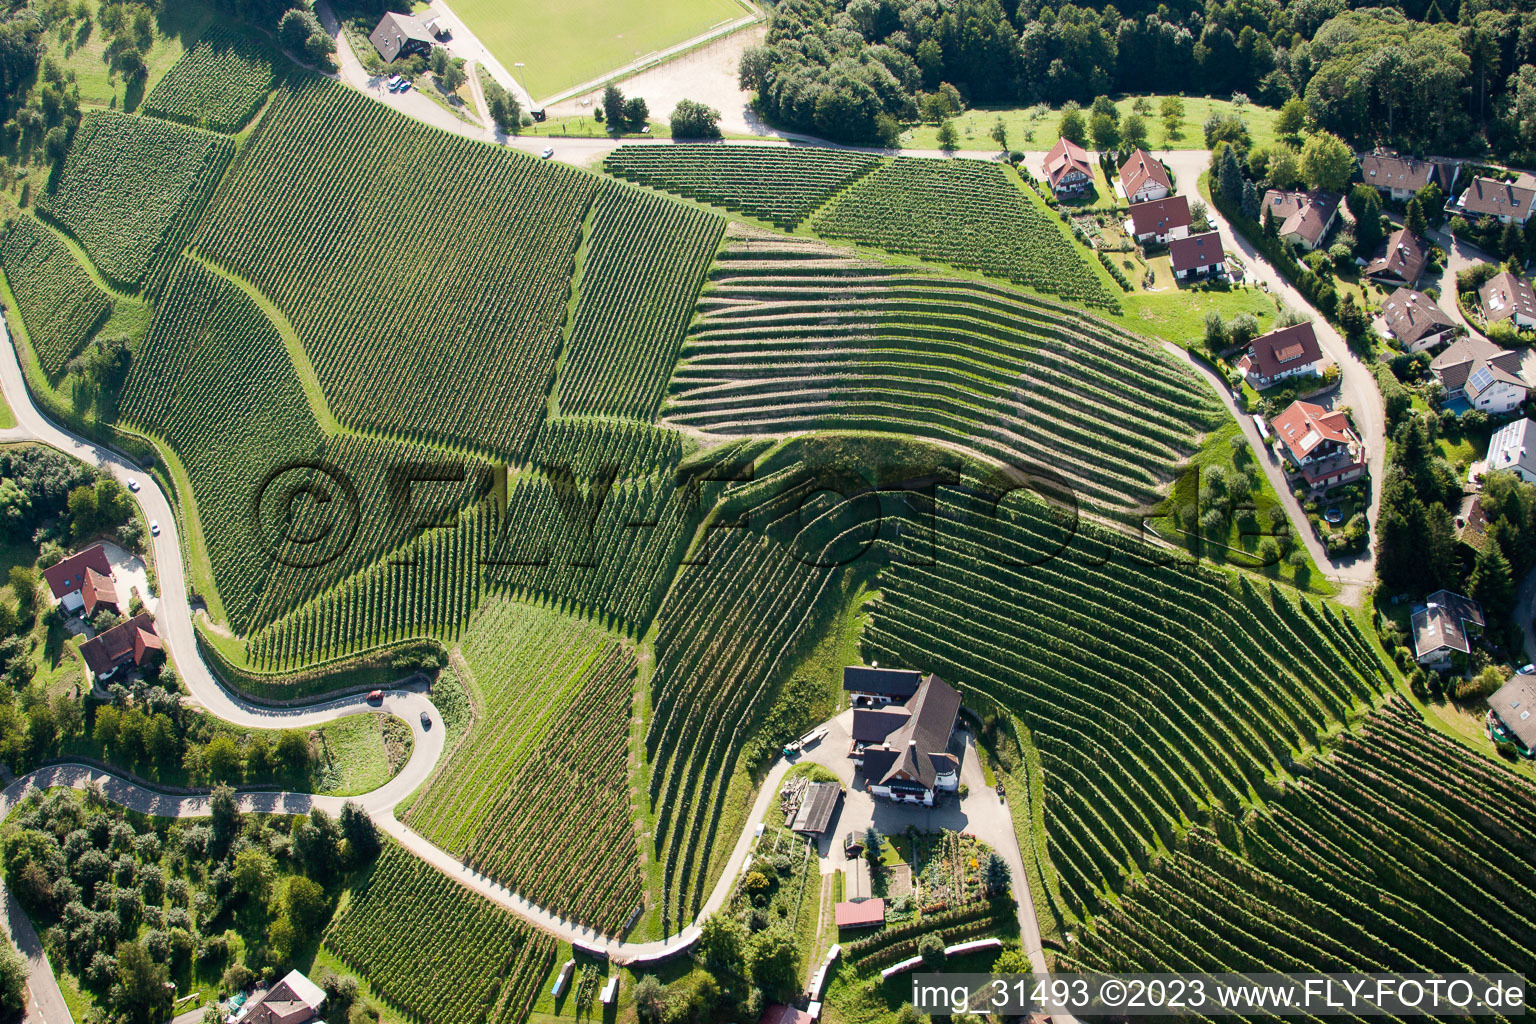 Aerial view of Vineyards near Bernhardshöfe in Kappelrodeck in the state Baden-Wuerttemberg, Germany